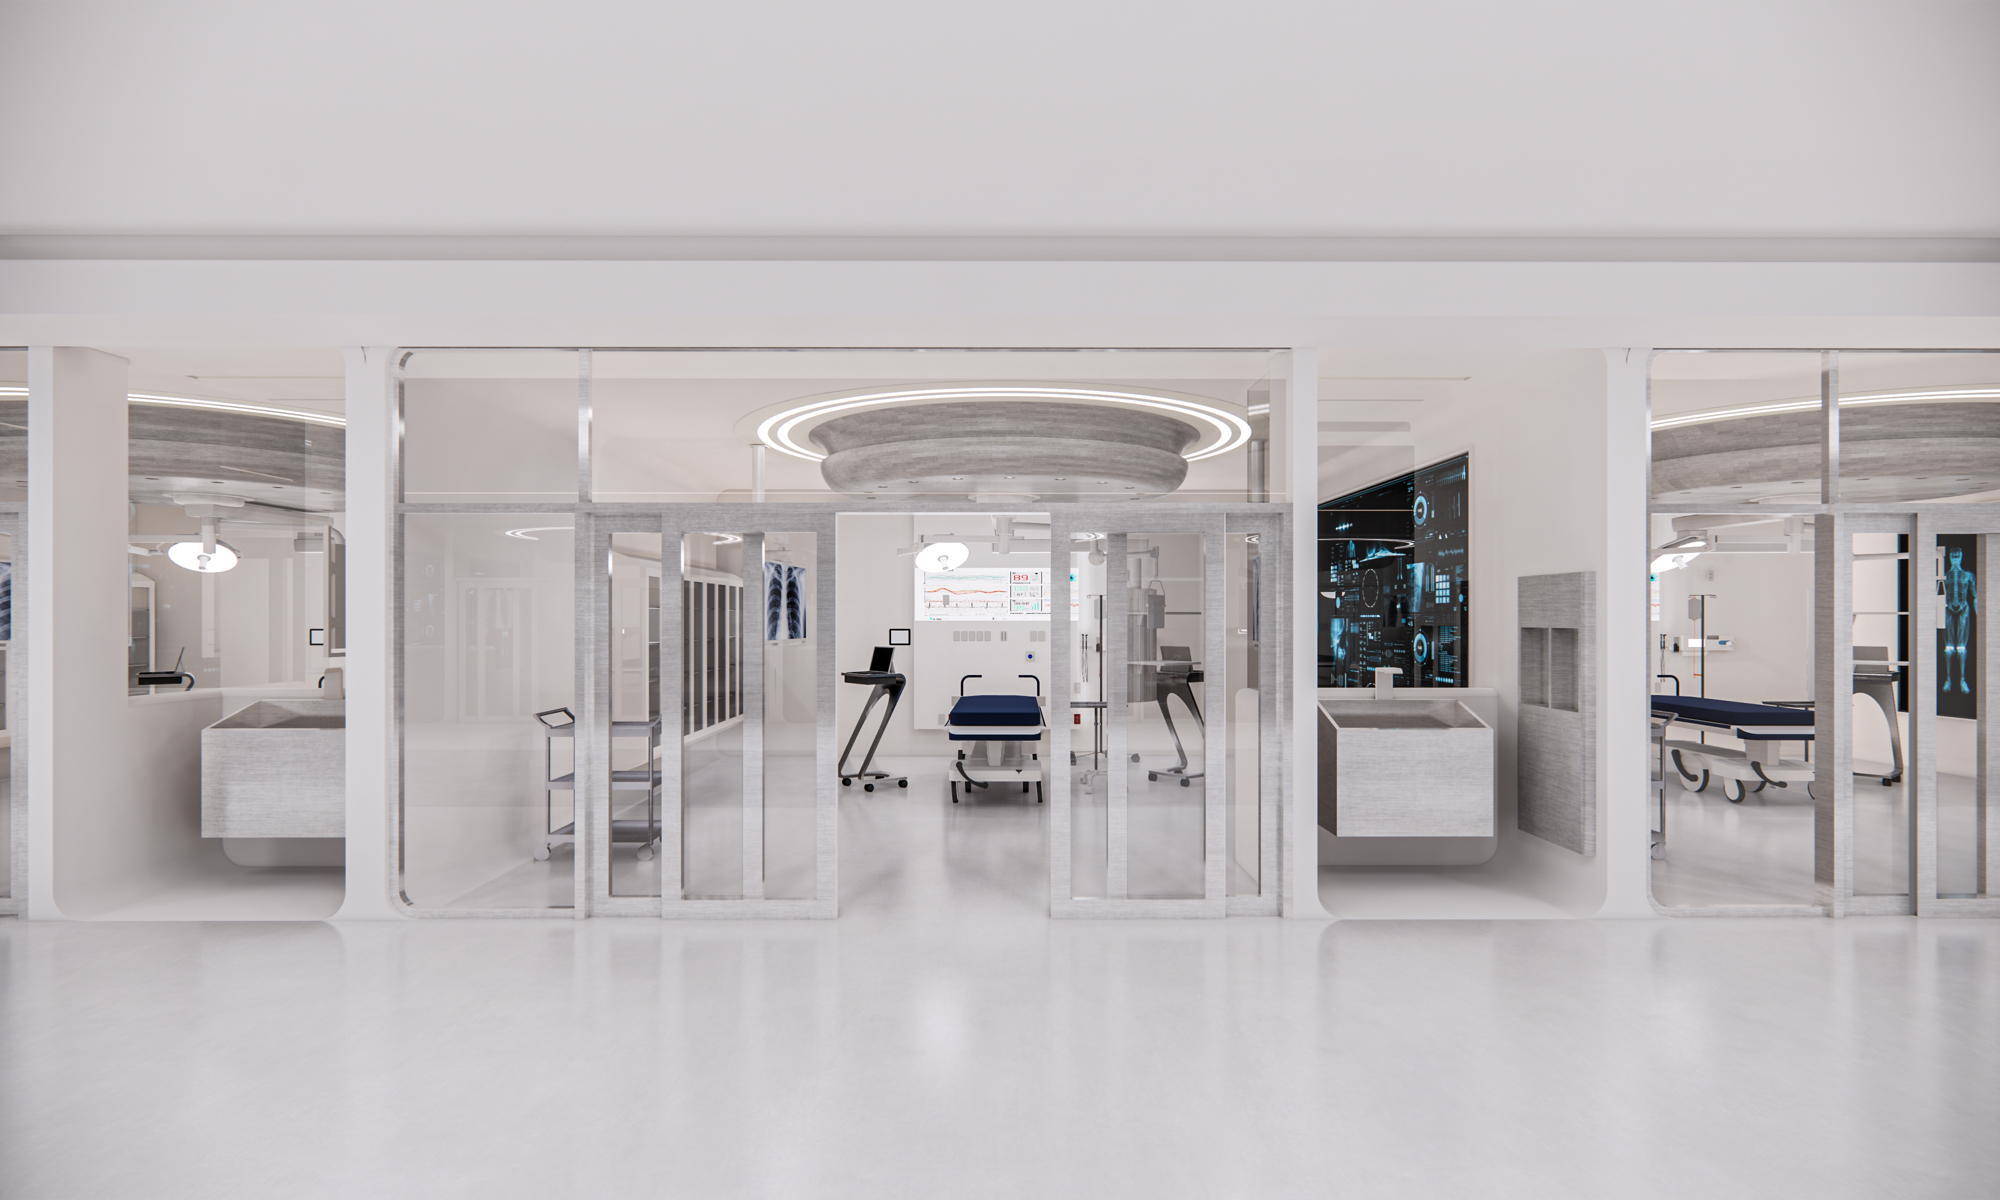 An artist's rendering of the trauma room at the center.